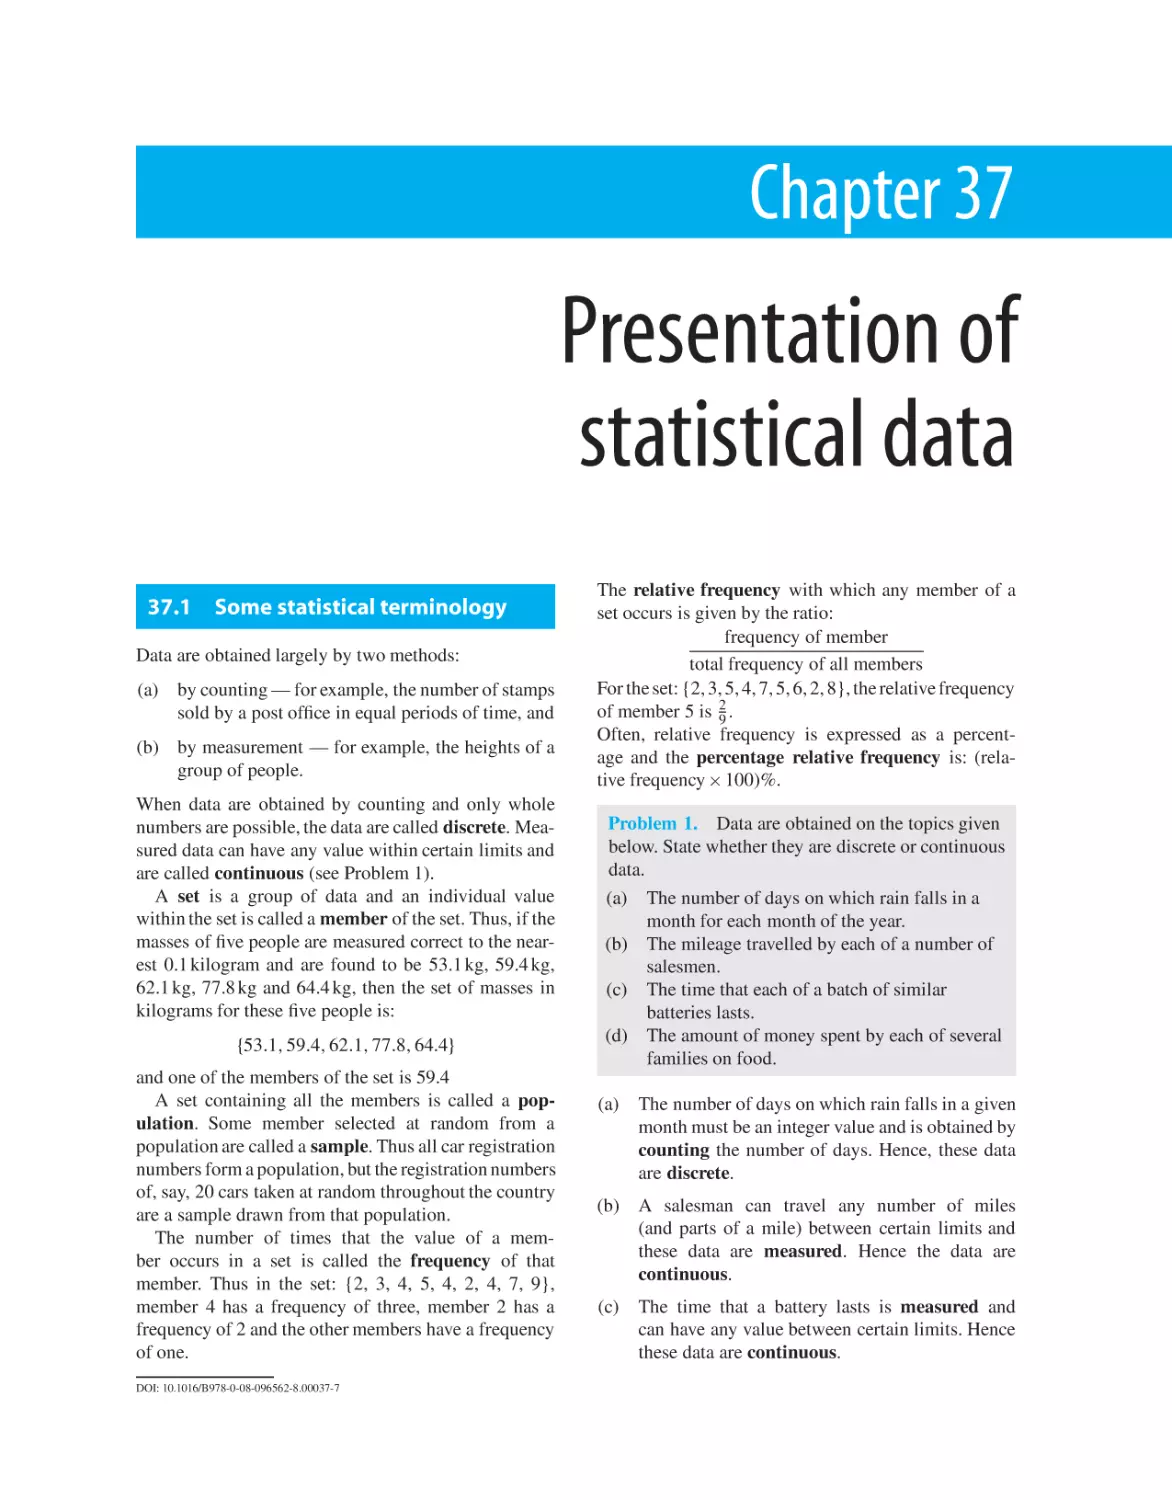 Chapter 37. Presentation of statistical data
37.1 Some statistical terminology